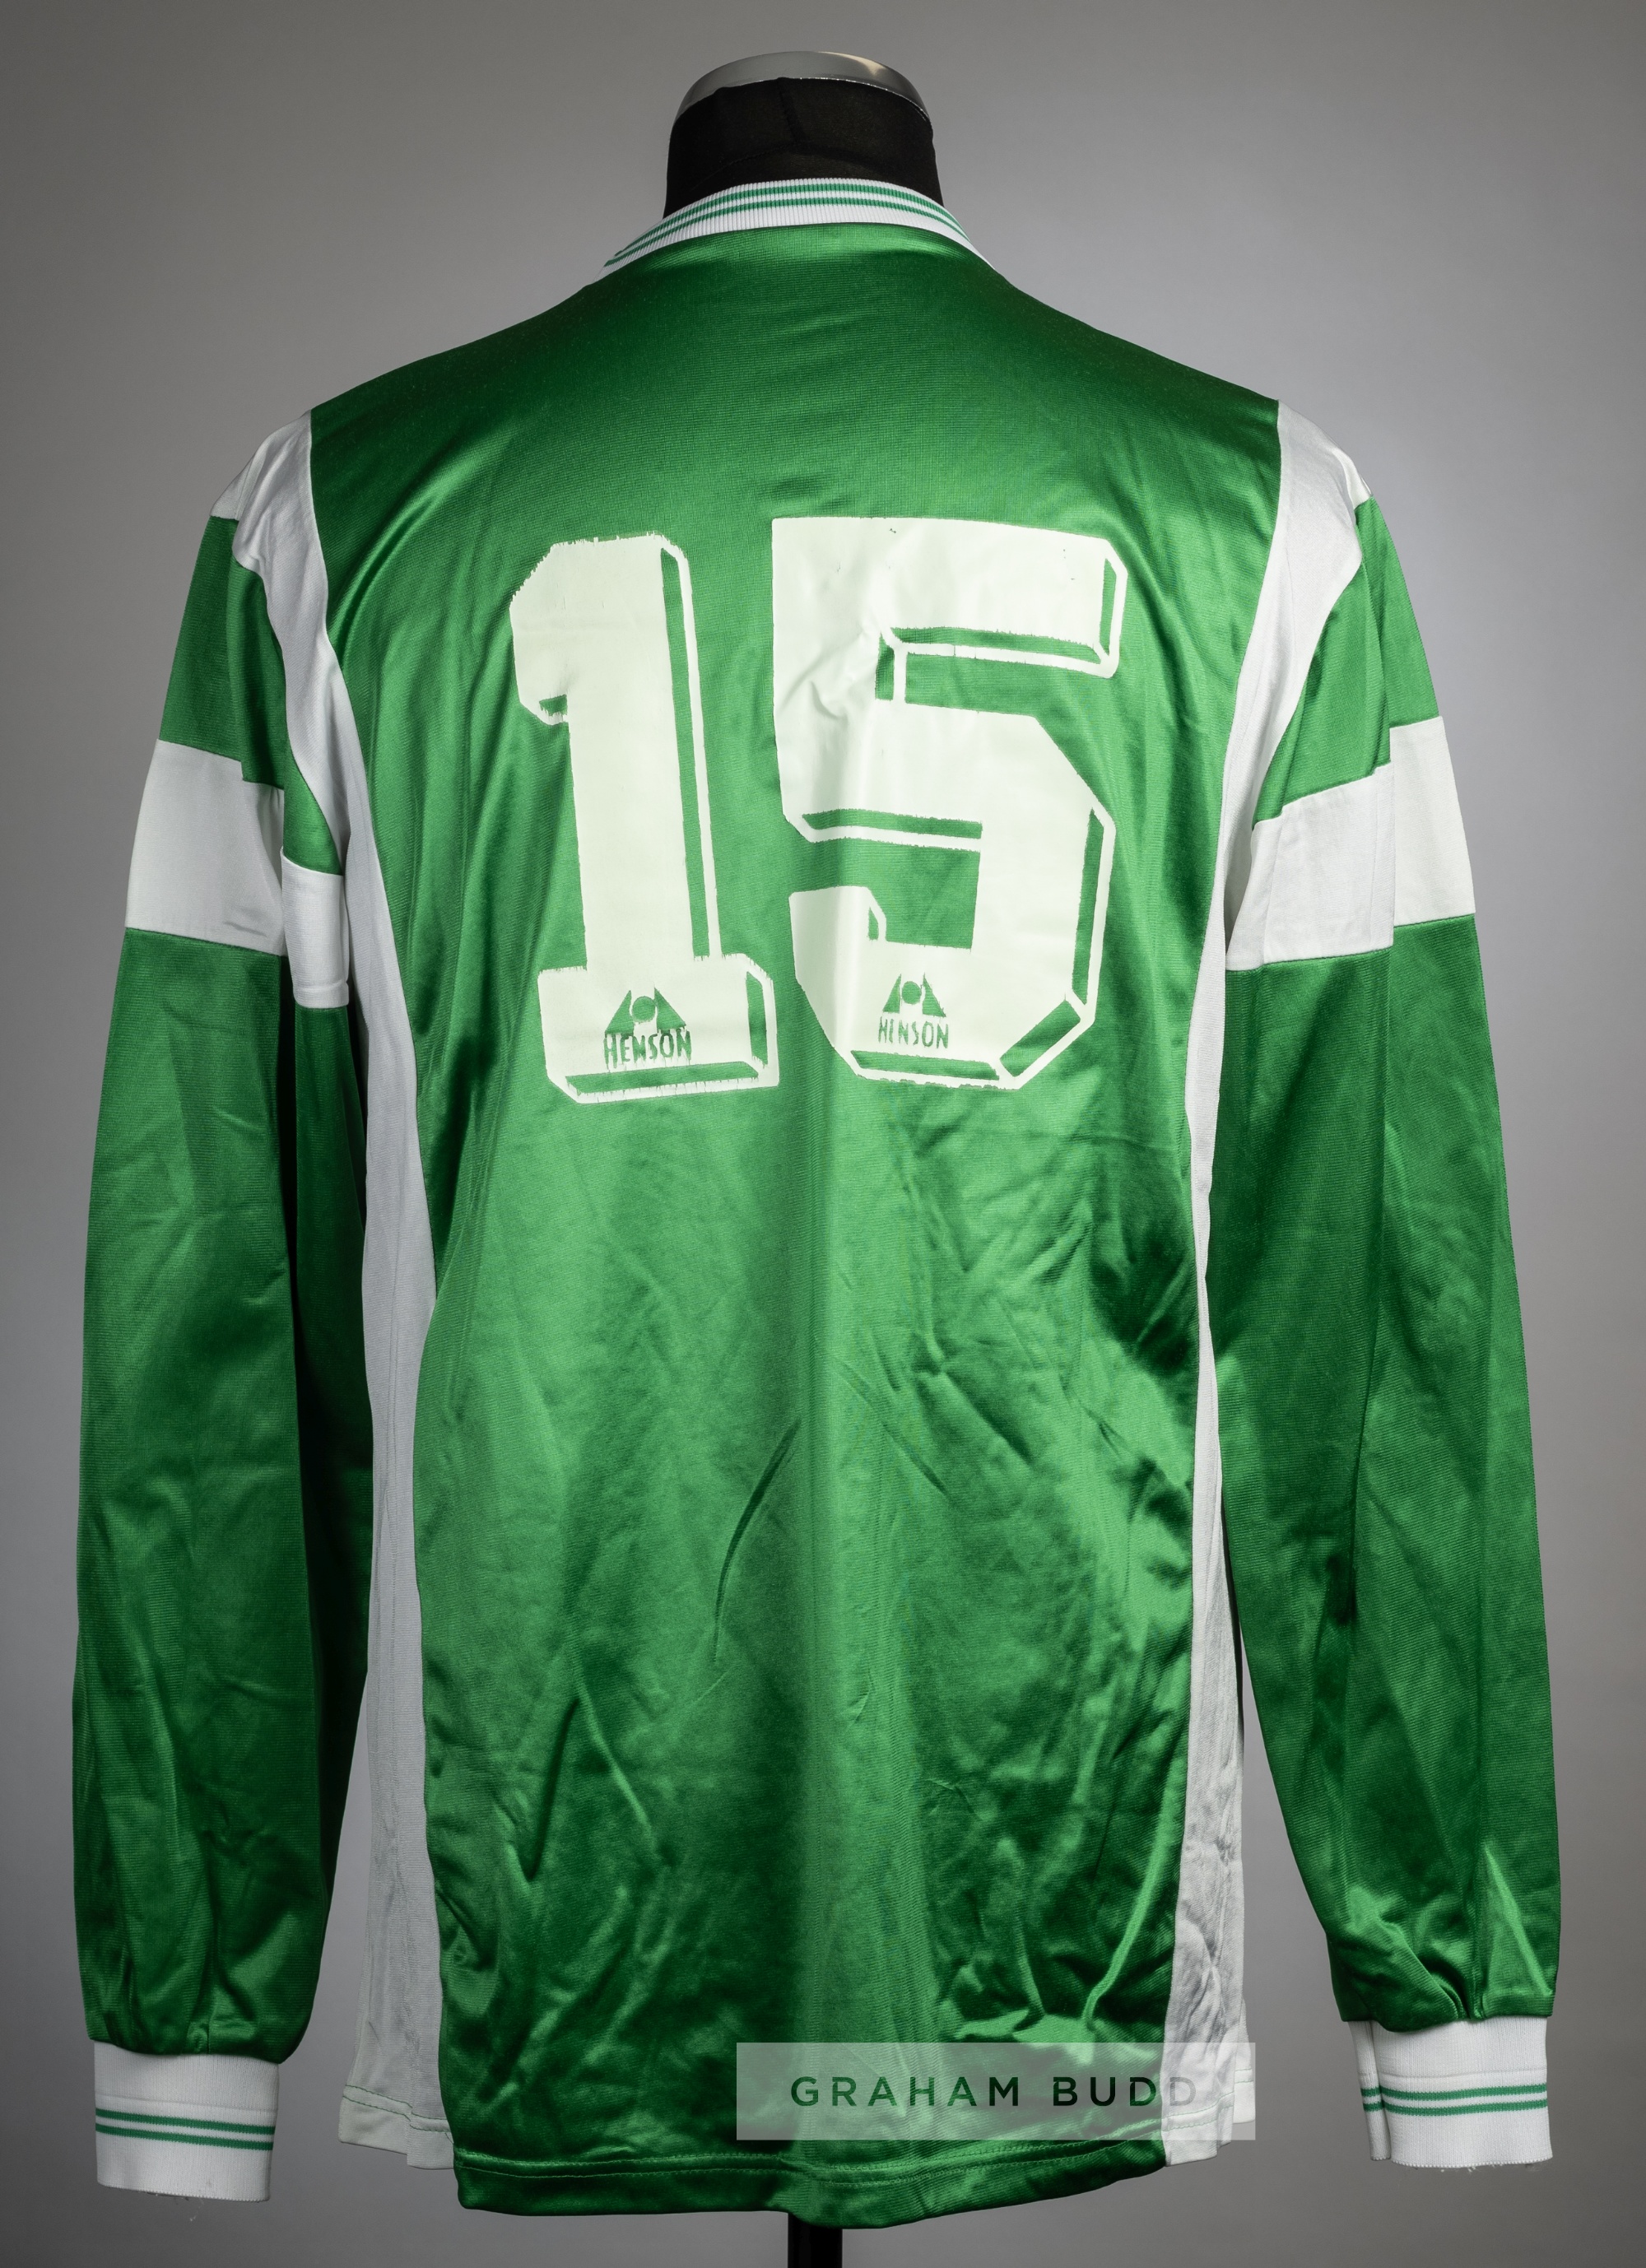 Icelandic green and white Volsungur Husavik no.15 jersey, circa 1990s, Henson, long-sleeved with - Image 2 of 2